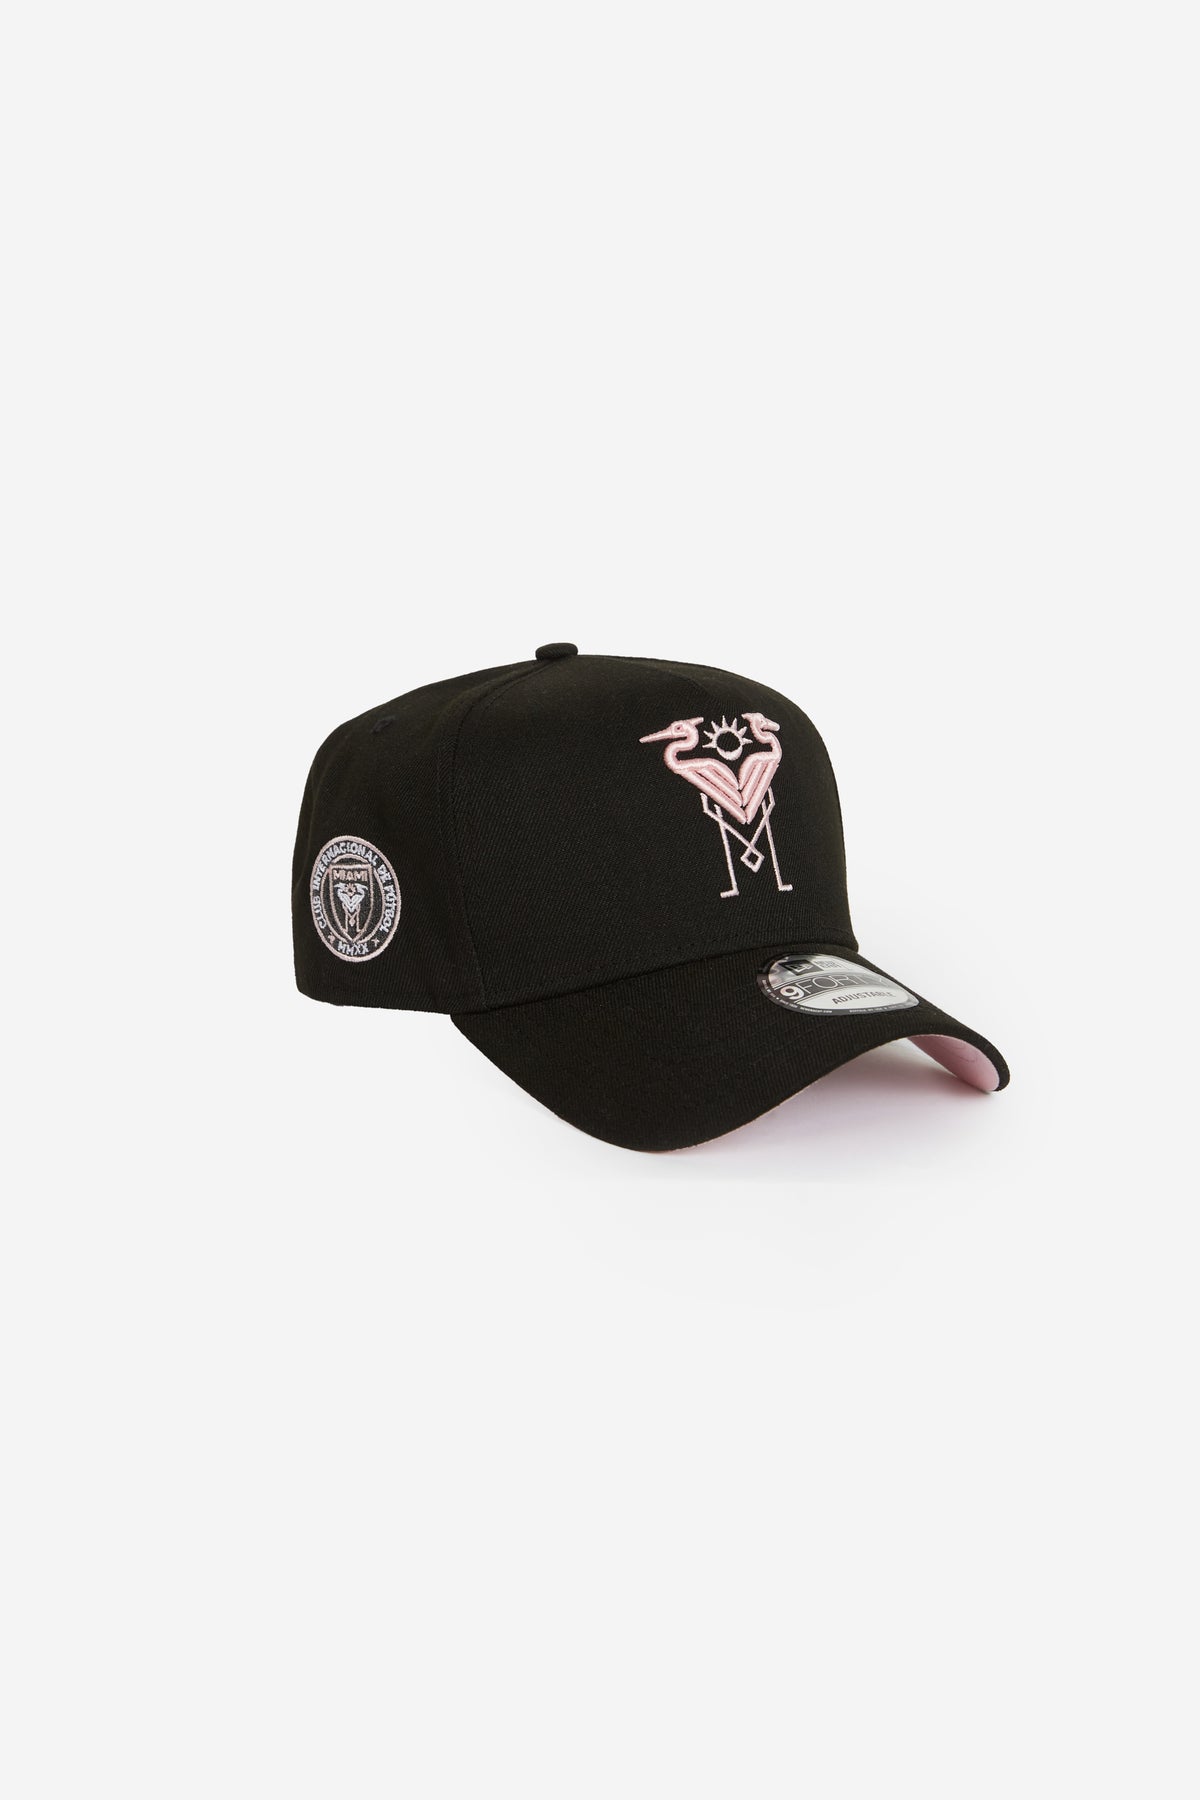 Inter Miami 9FORTY A-Frame Cap - Black